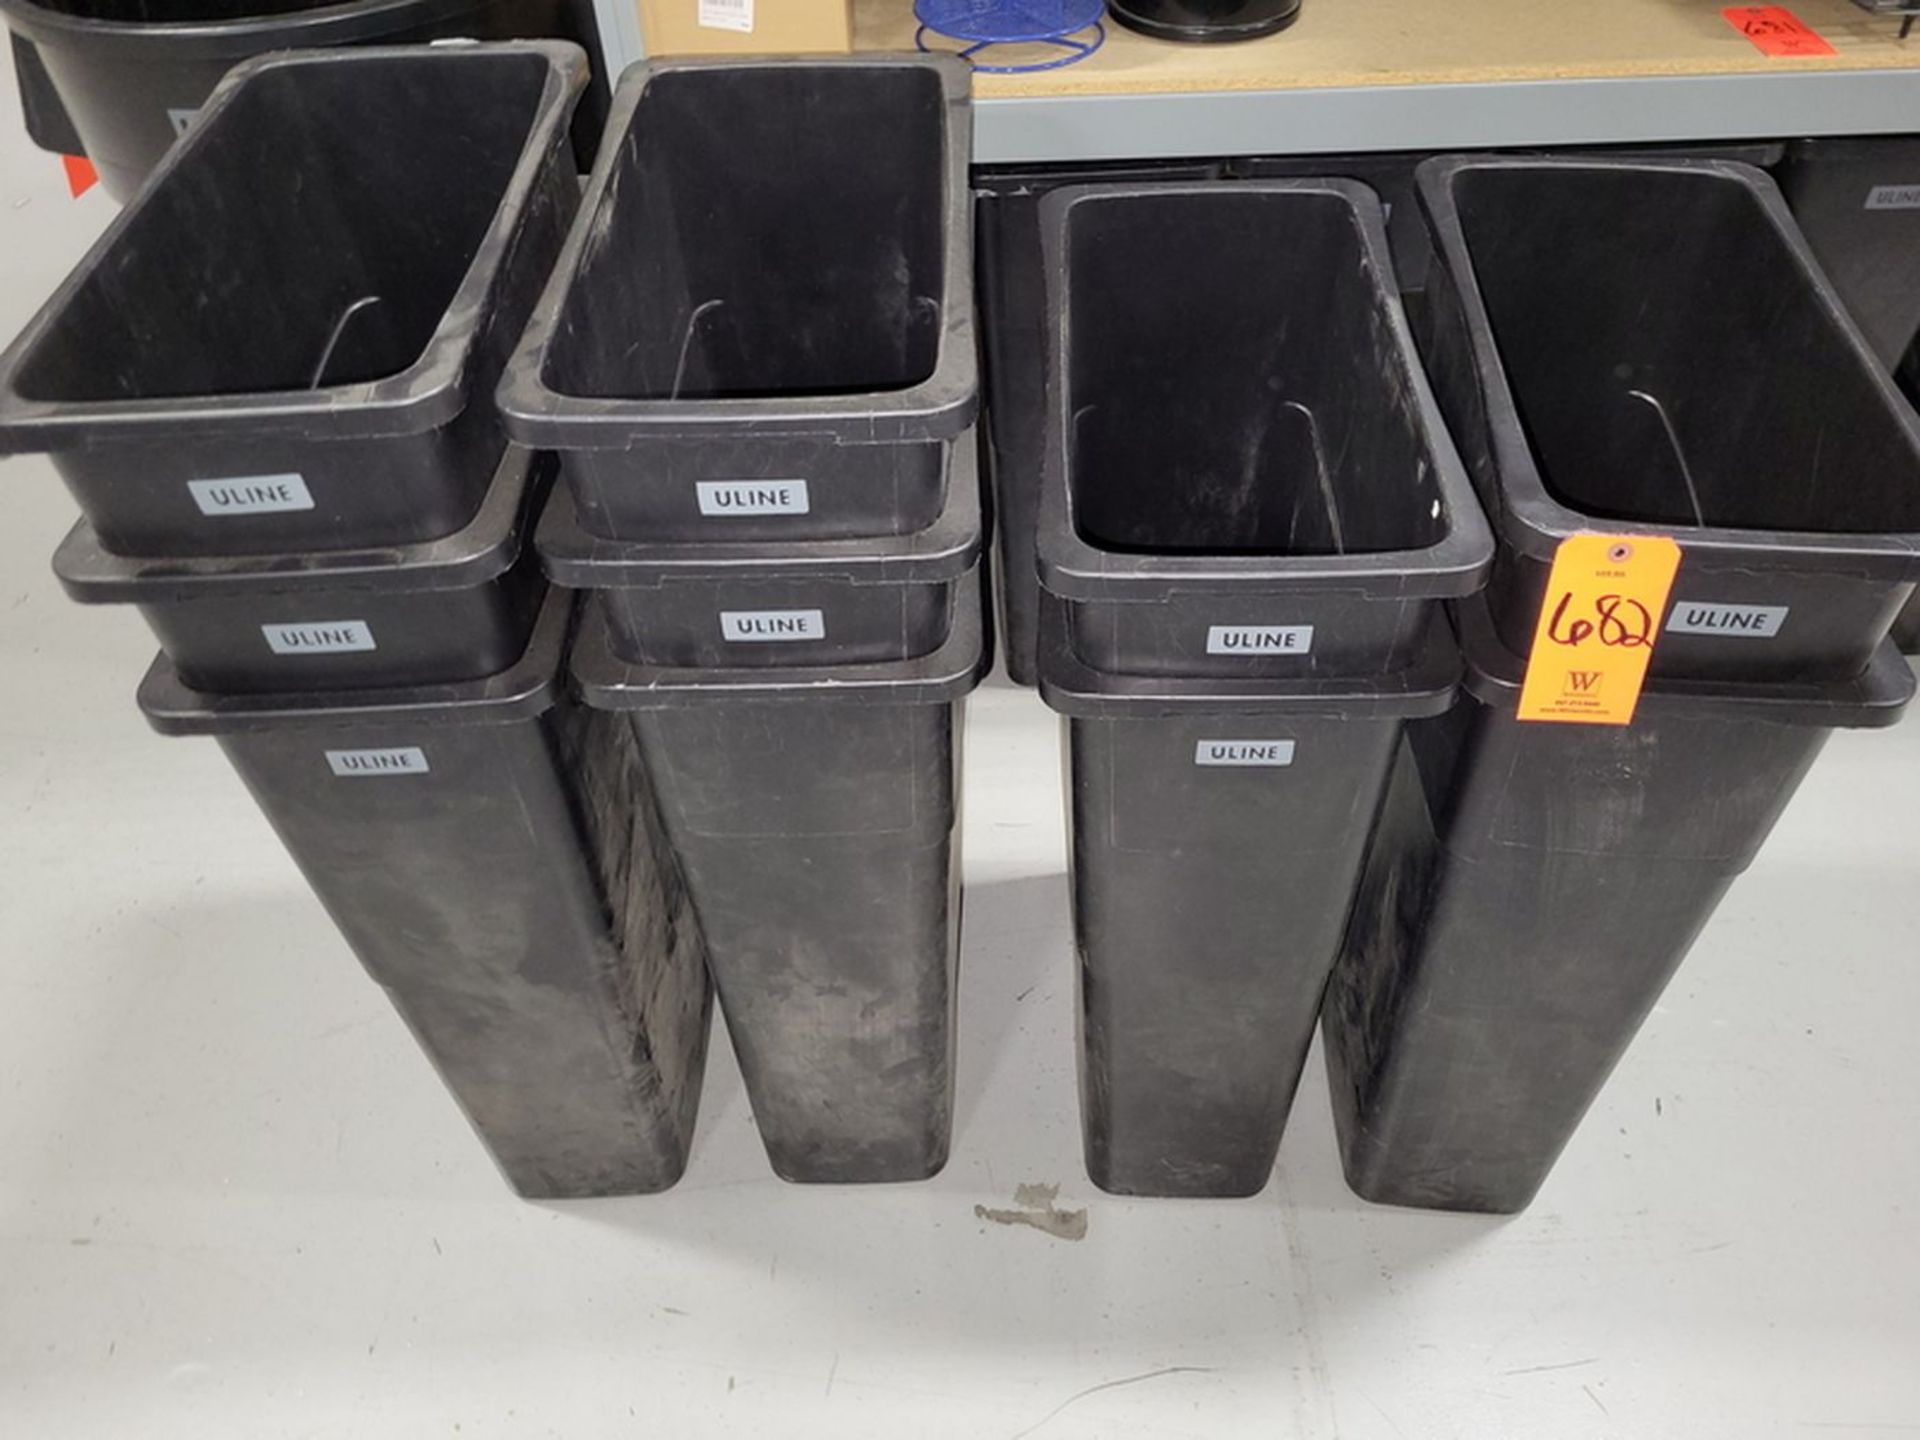 Lot - (10) Uline Plastic Waste Containers; Black